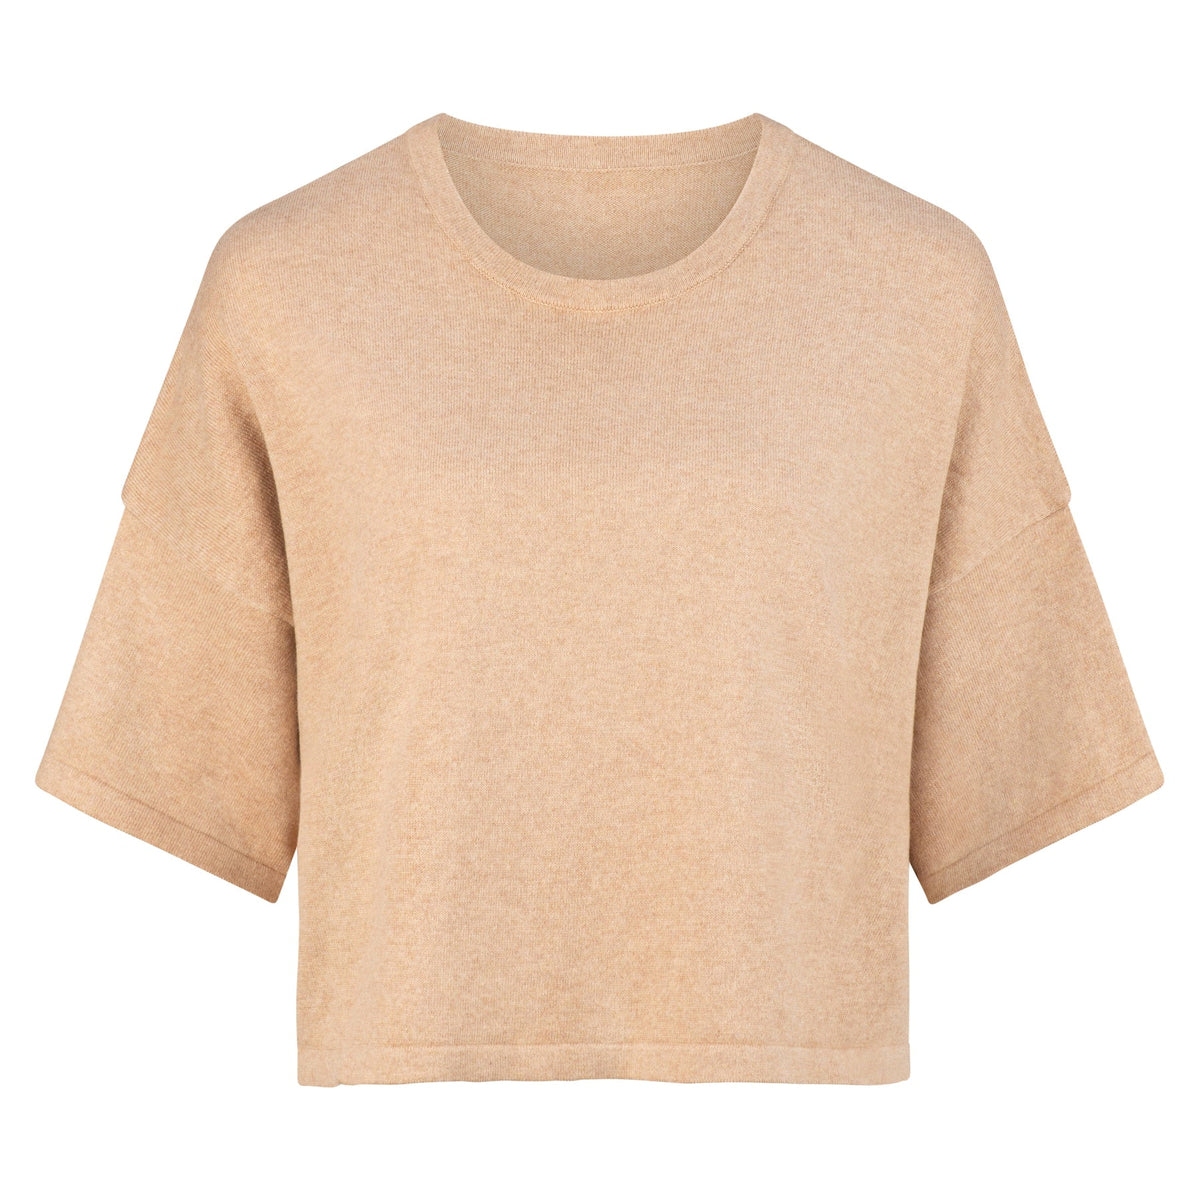 Short sleeve cotton and cashmere blend boxy jumper with crew neckline